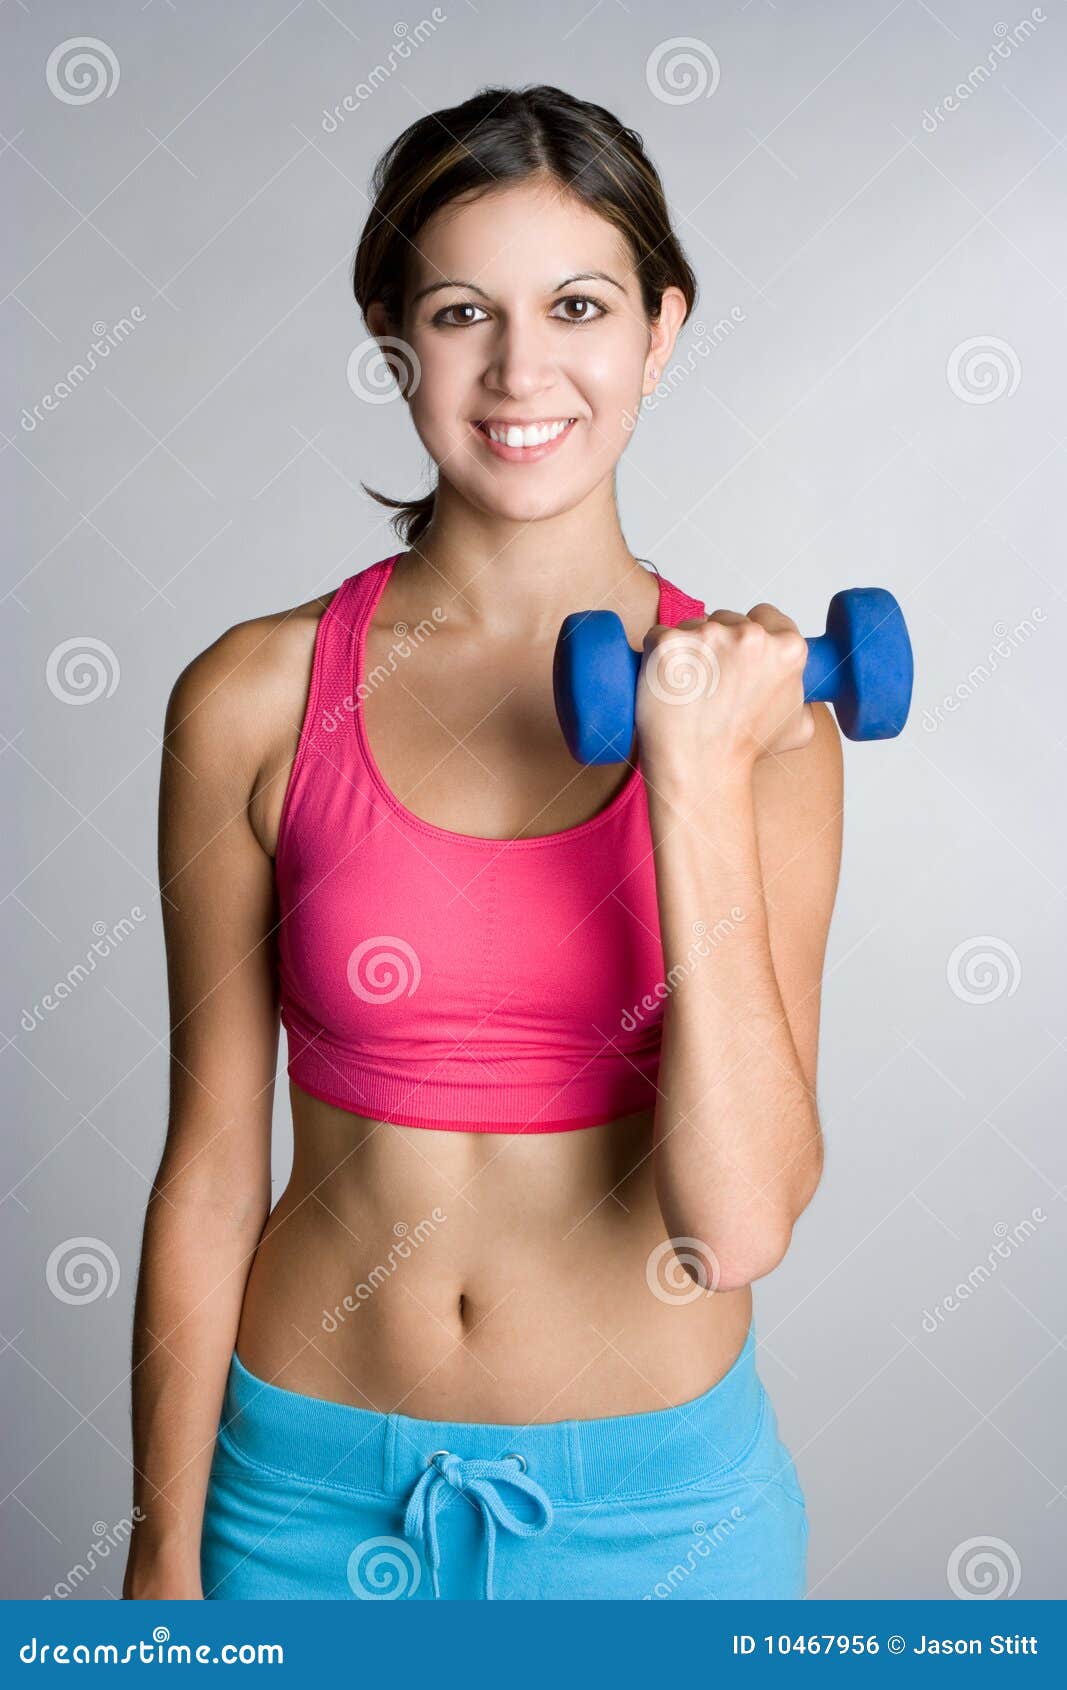 Working Out Teen 121